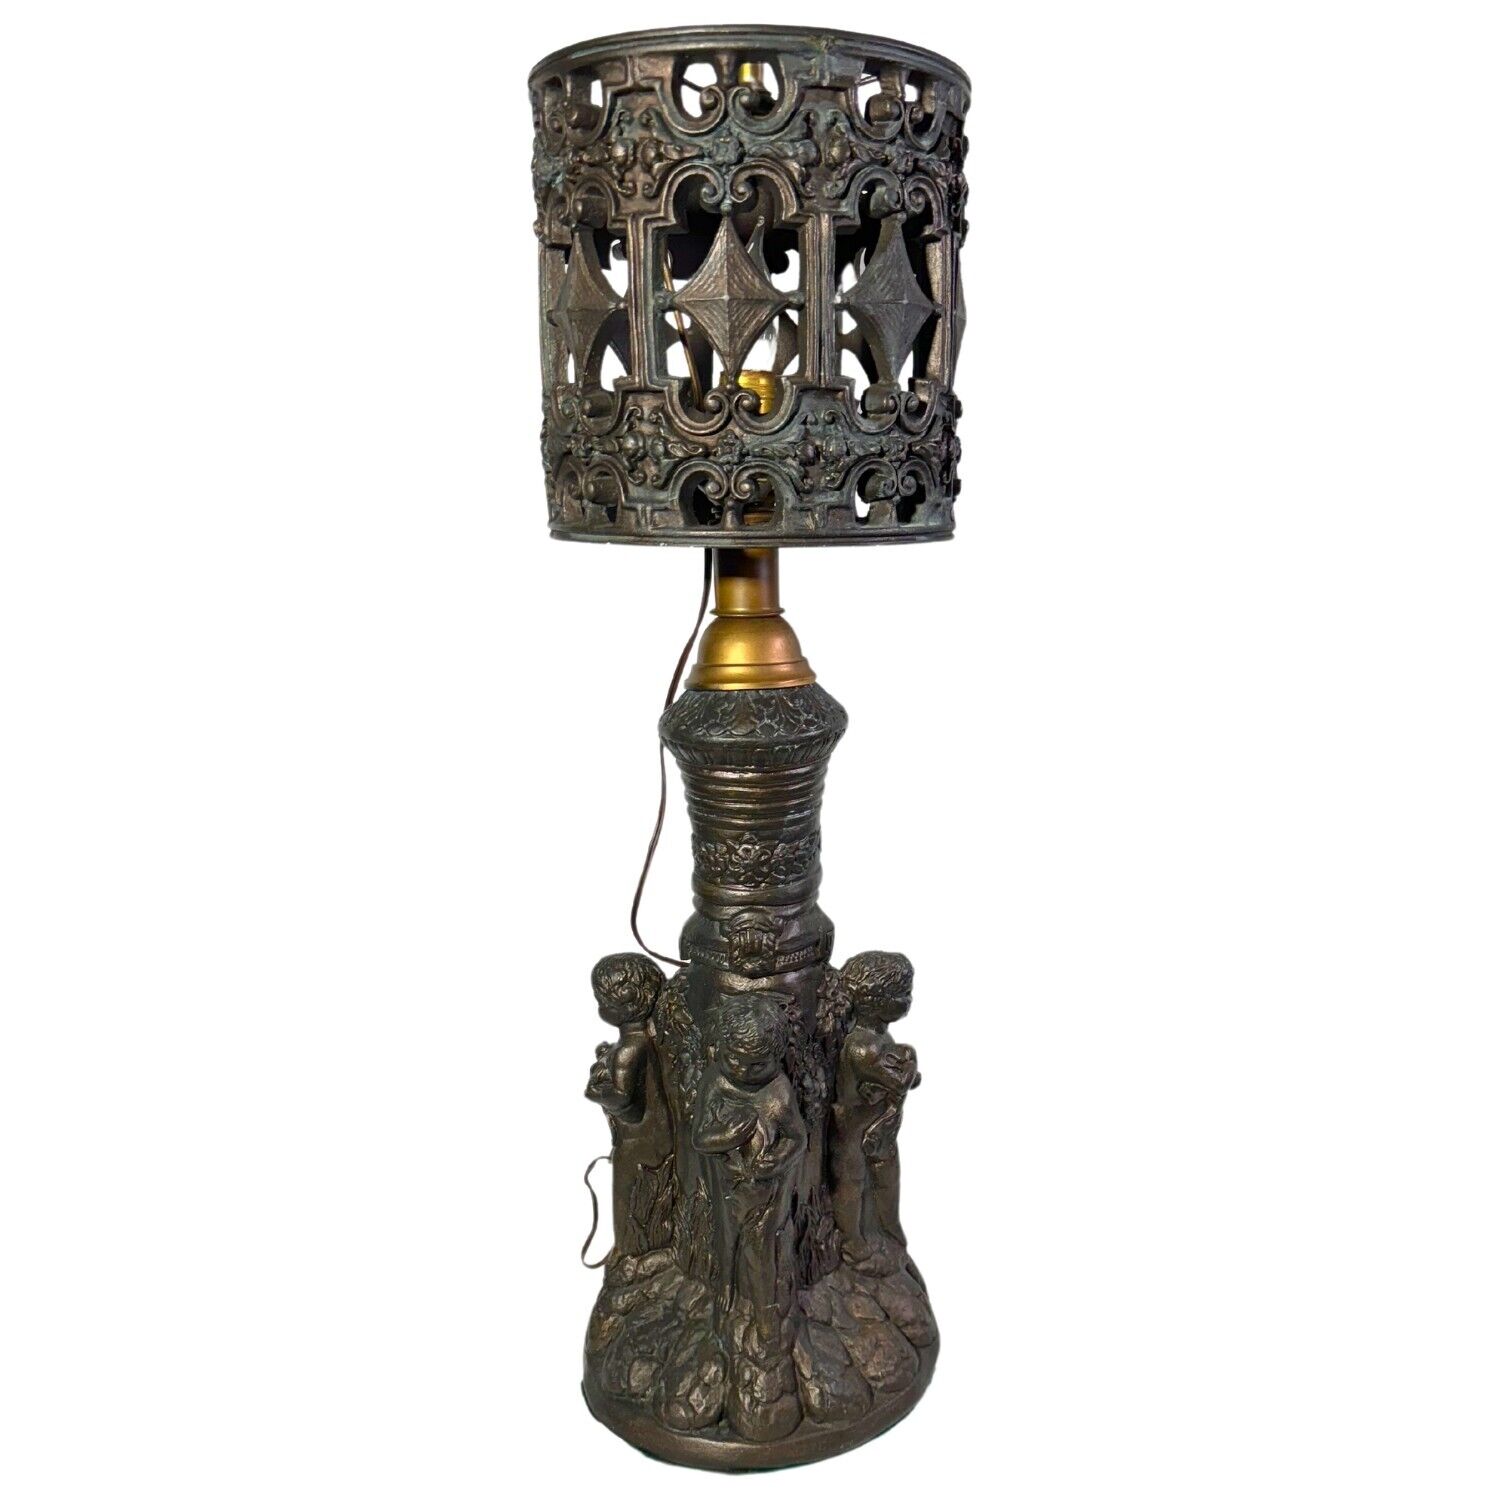 Gothic Styled -  Sculptured Table Lamp with Molded Children on the Base and Stem